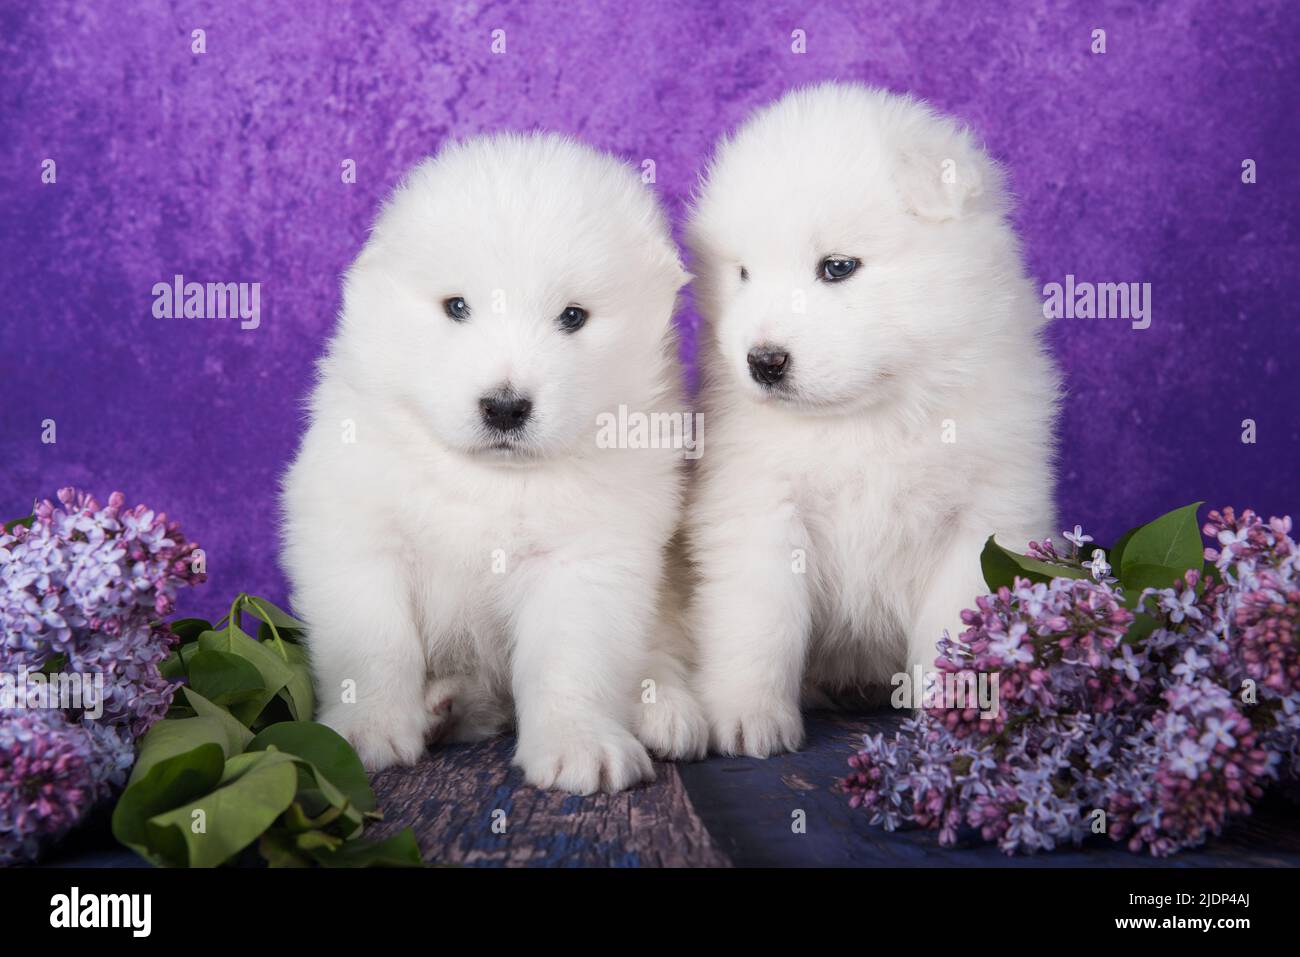 Two White fluffy small Samoyed puppies dogs are sitting on purple background with lilac flowers Stock Photo